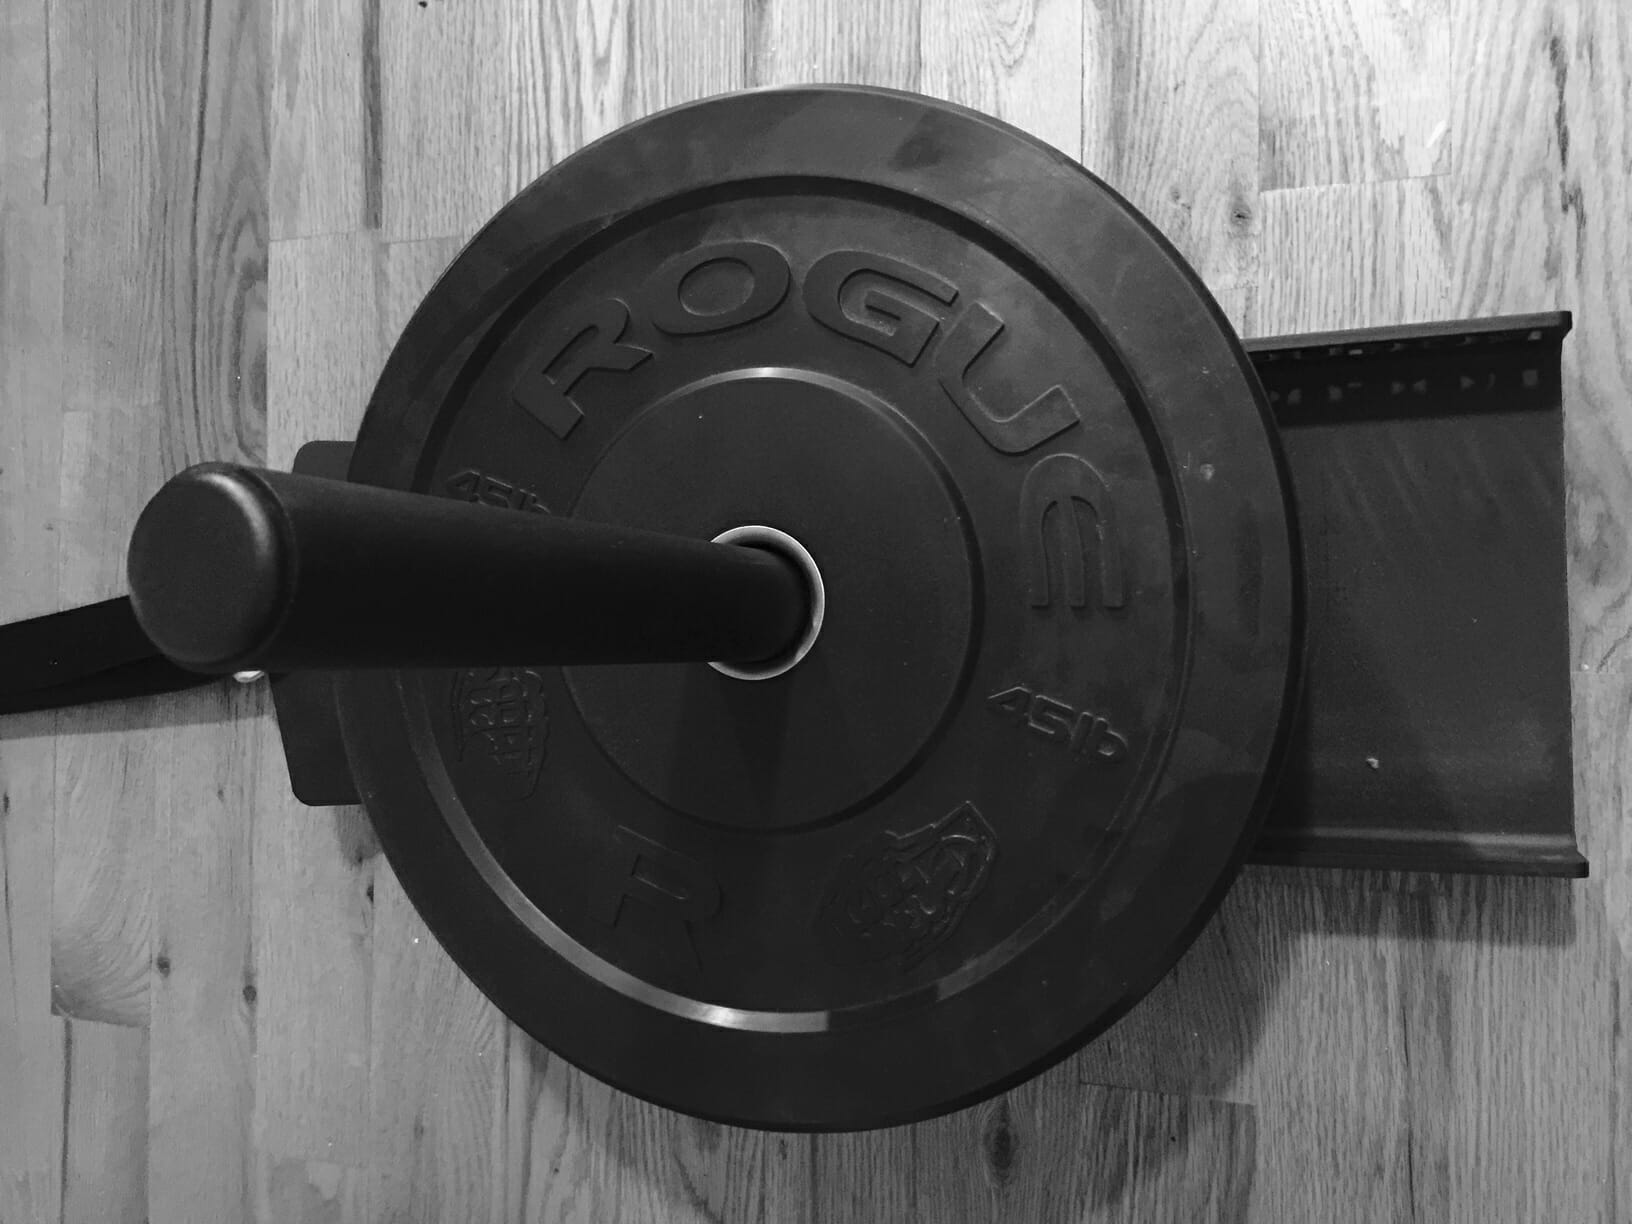 Rogue Weight Sled.